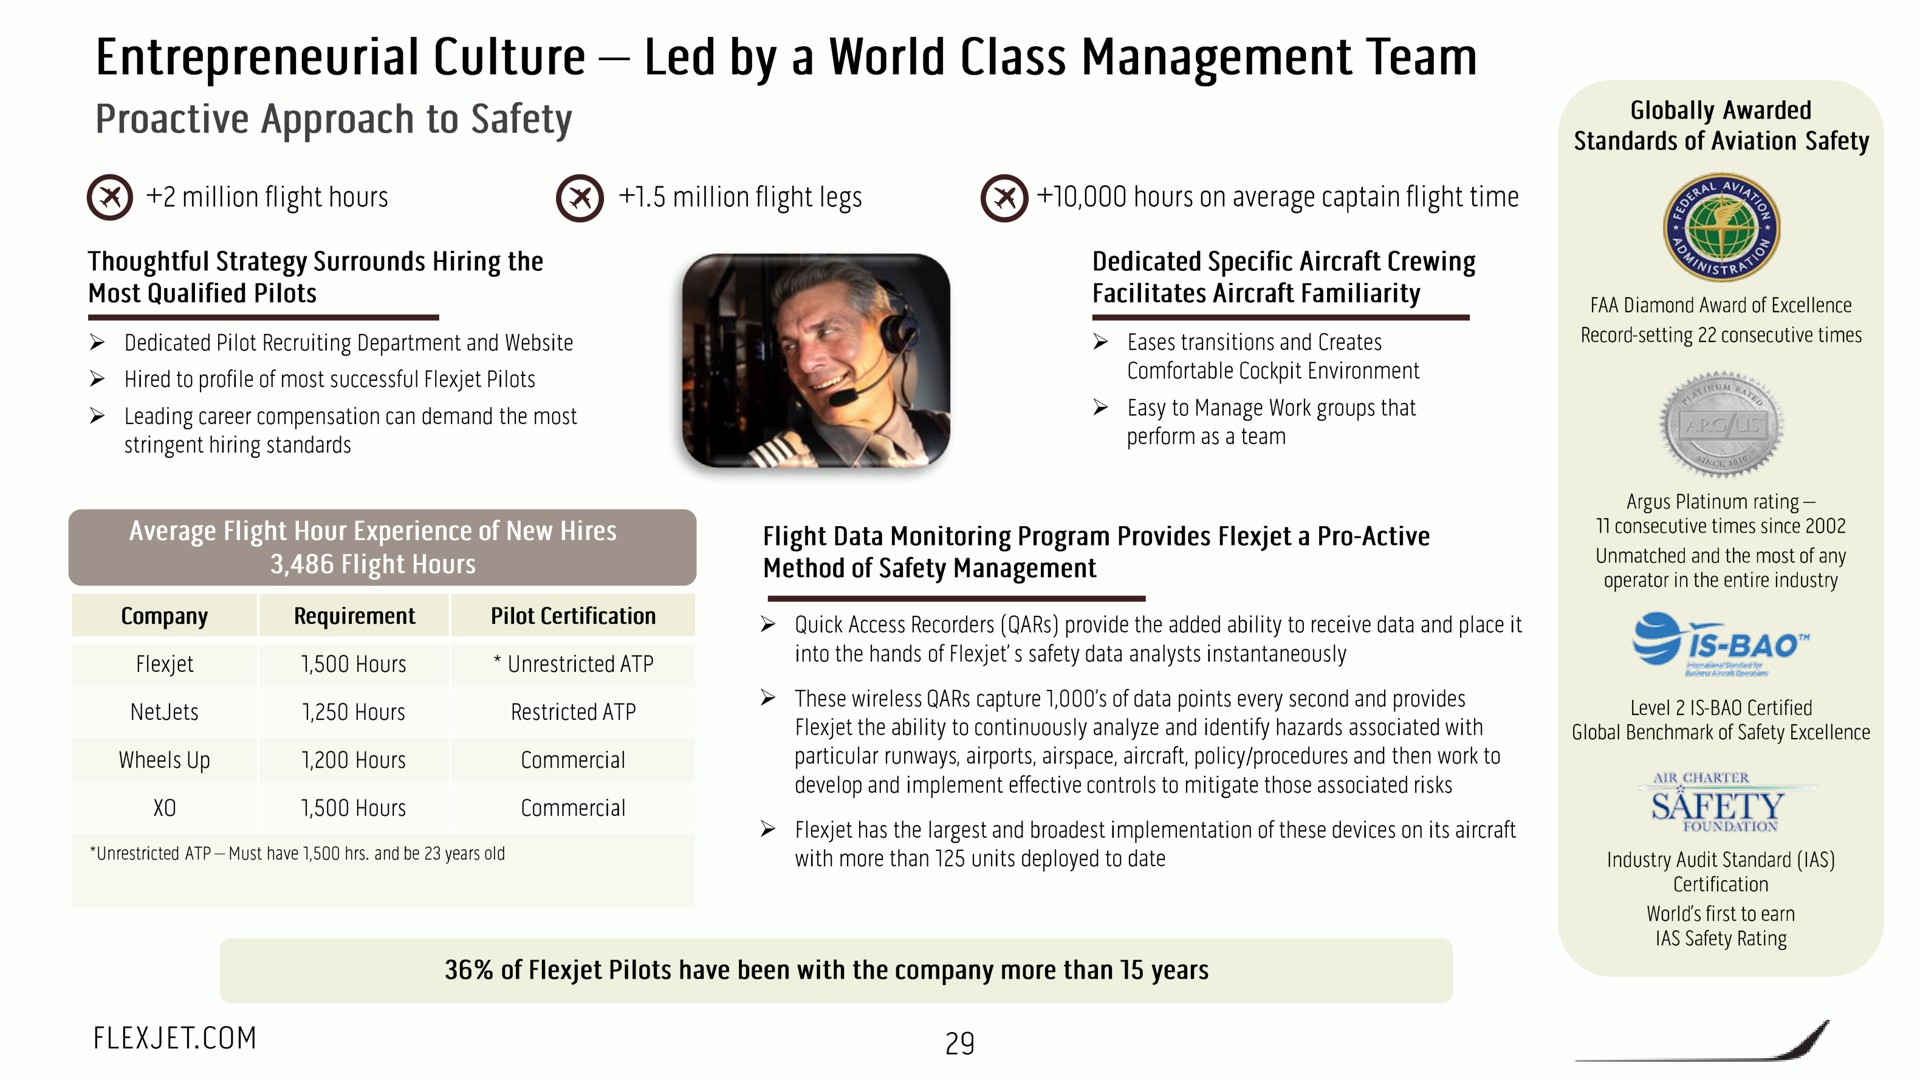 entrepreneurial culture led by a world class management team approach to safety million flight hours million flight legs hours on average captain flight time a | FlexJet